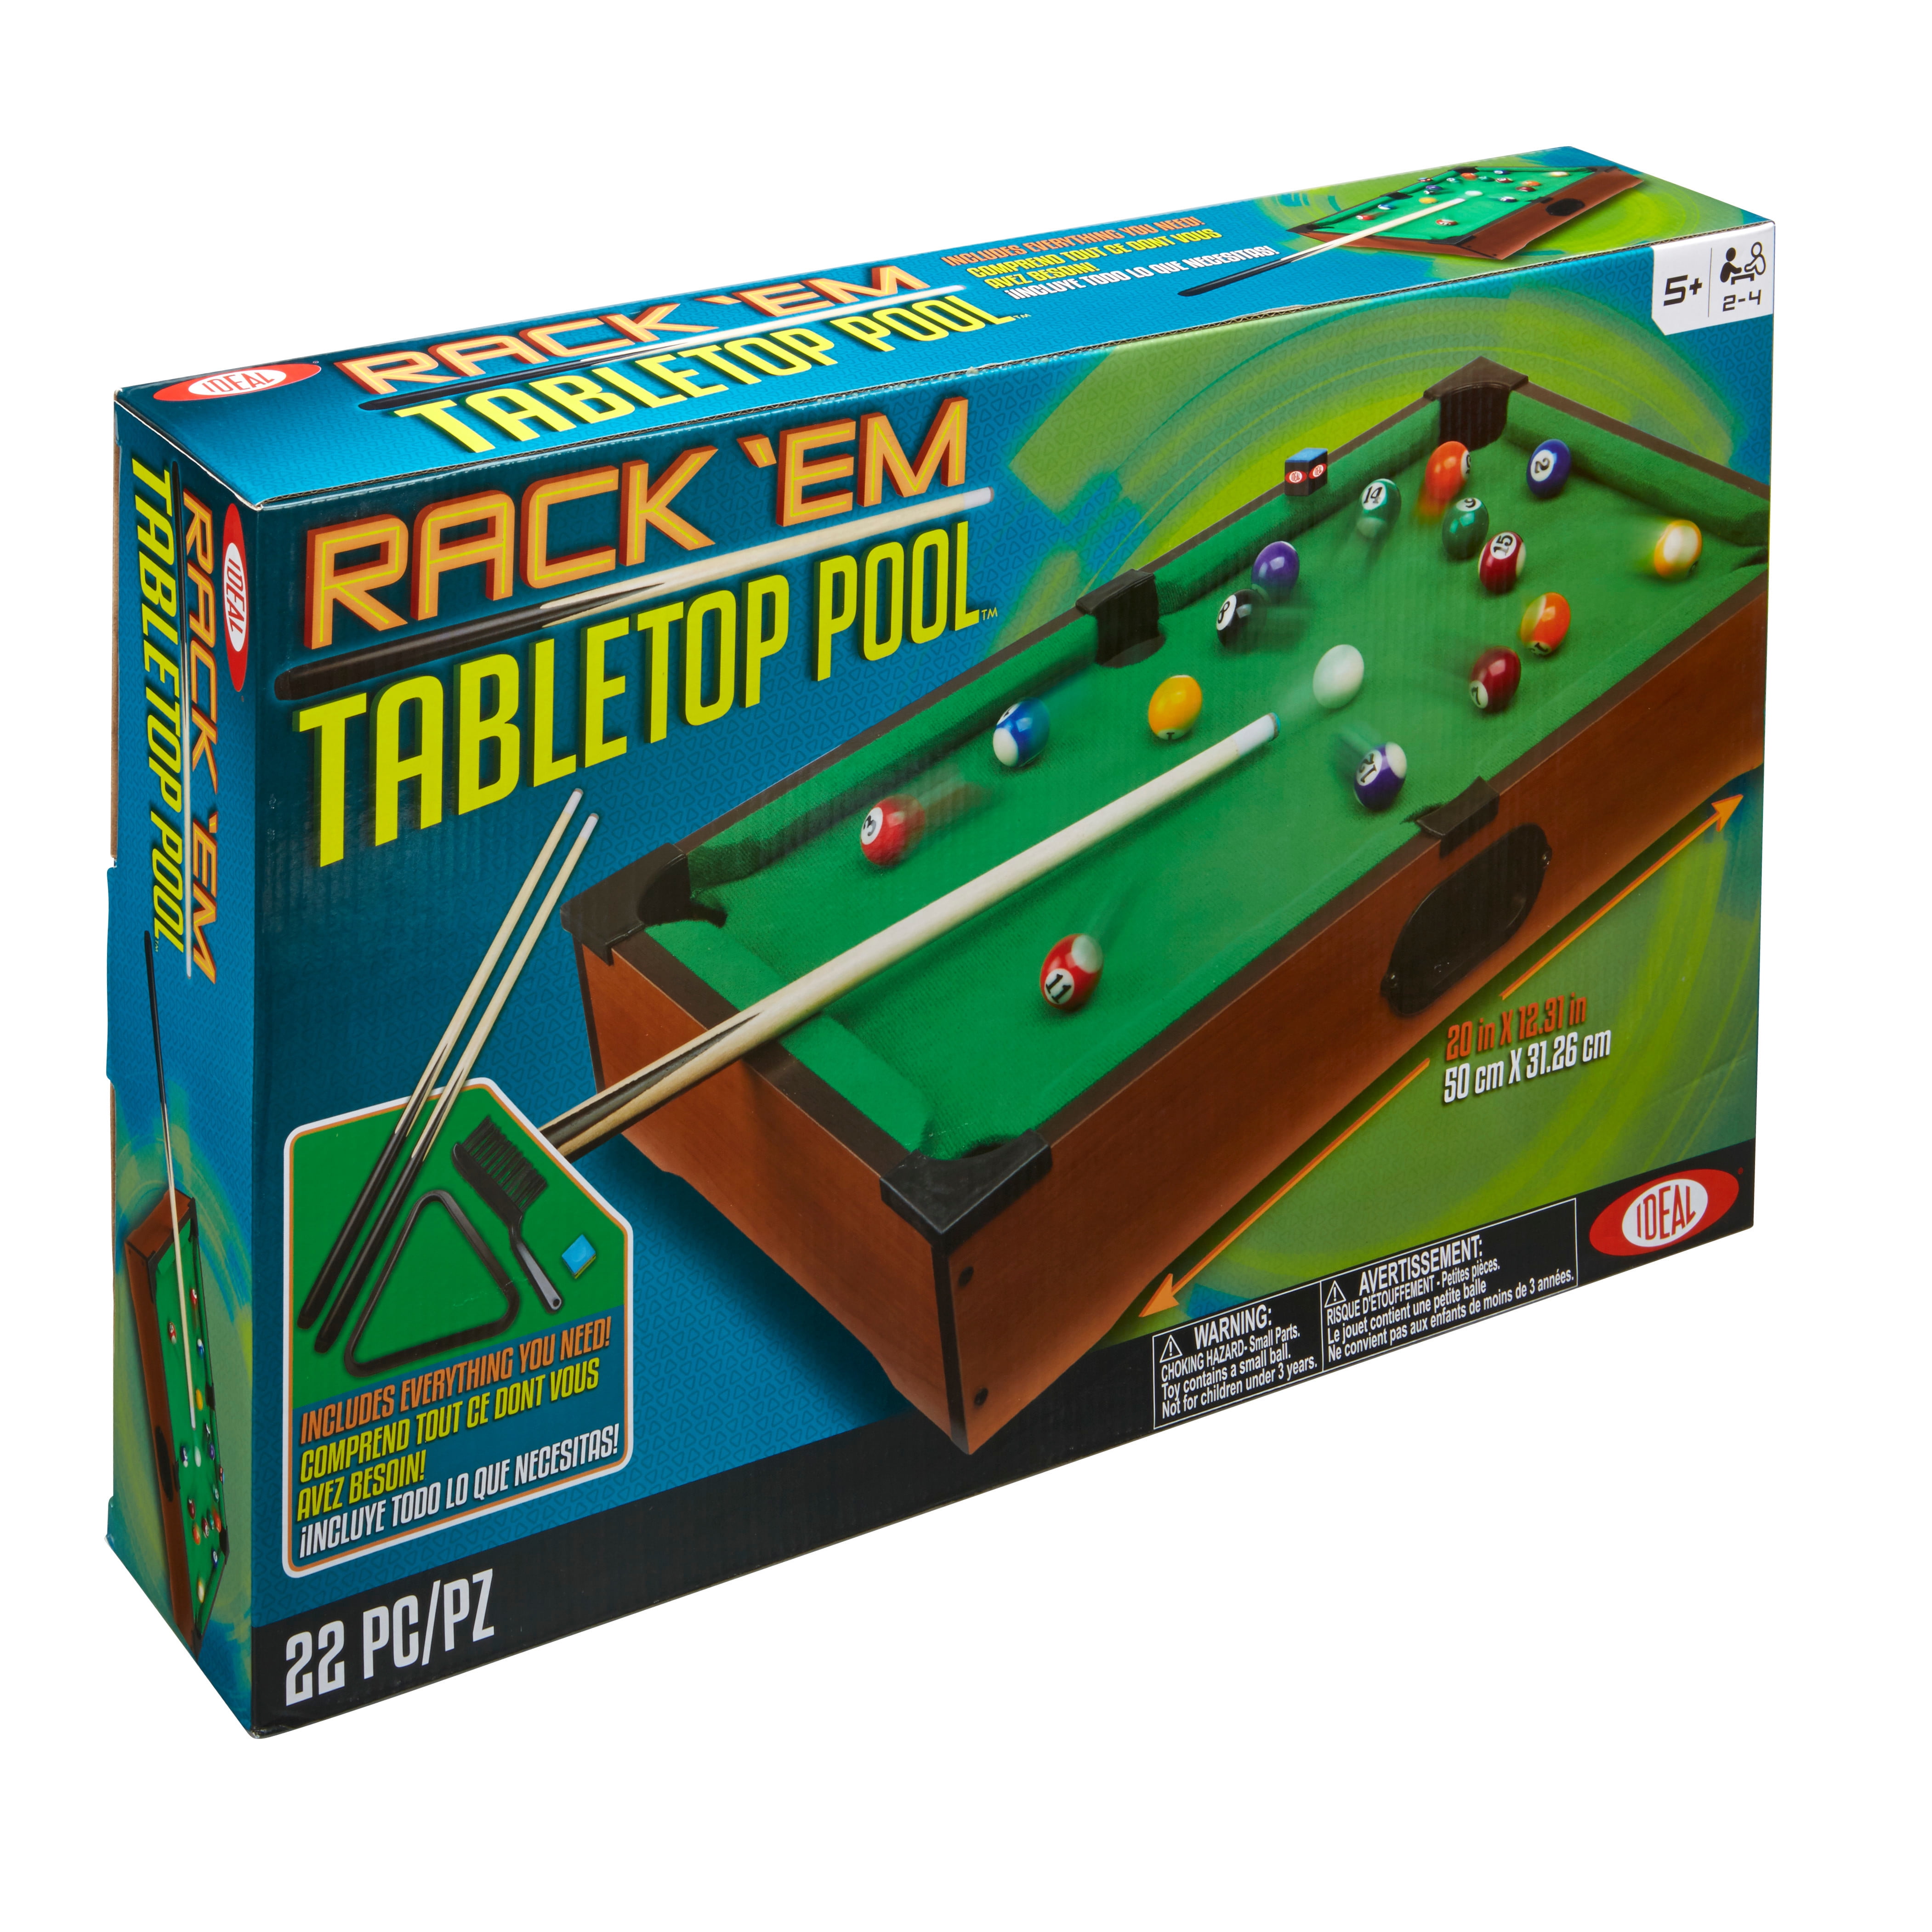 New Pool Table Game Mini Size For Kids M.Y Games 3 years plus Free Delivery 